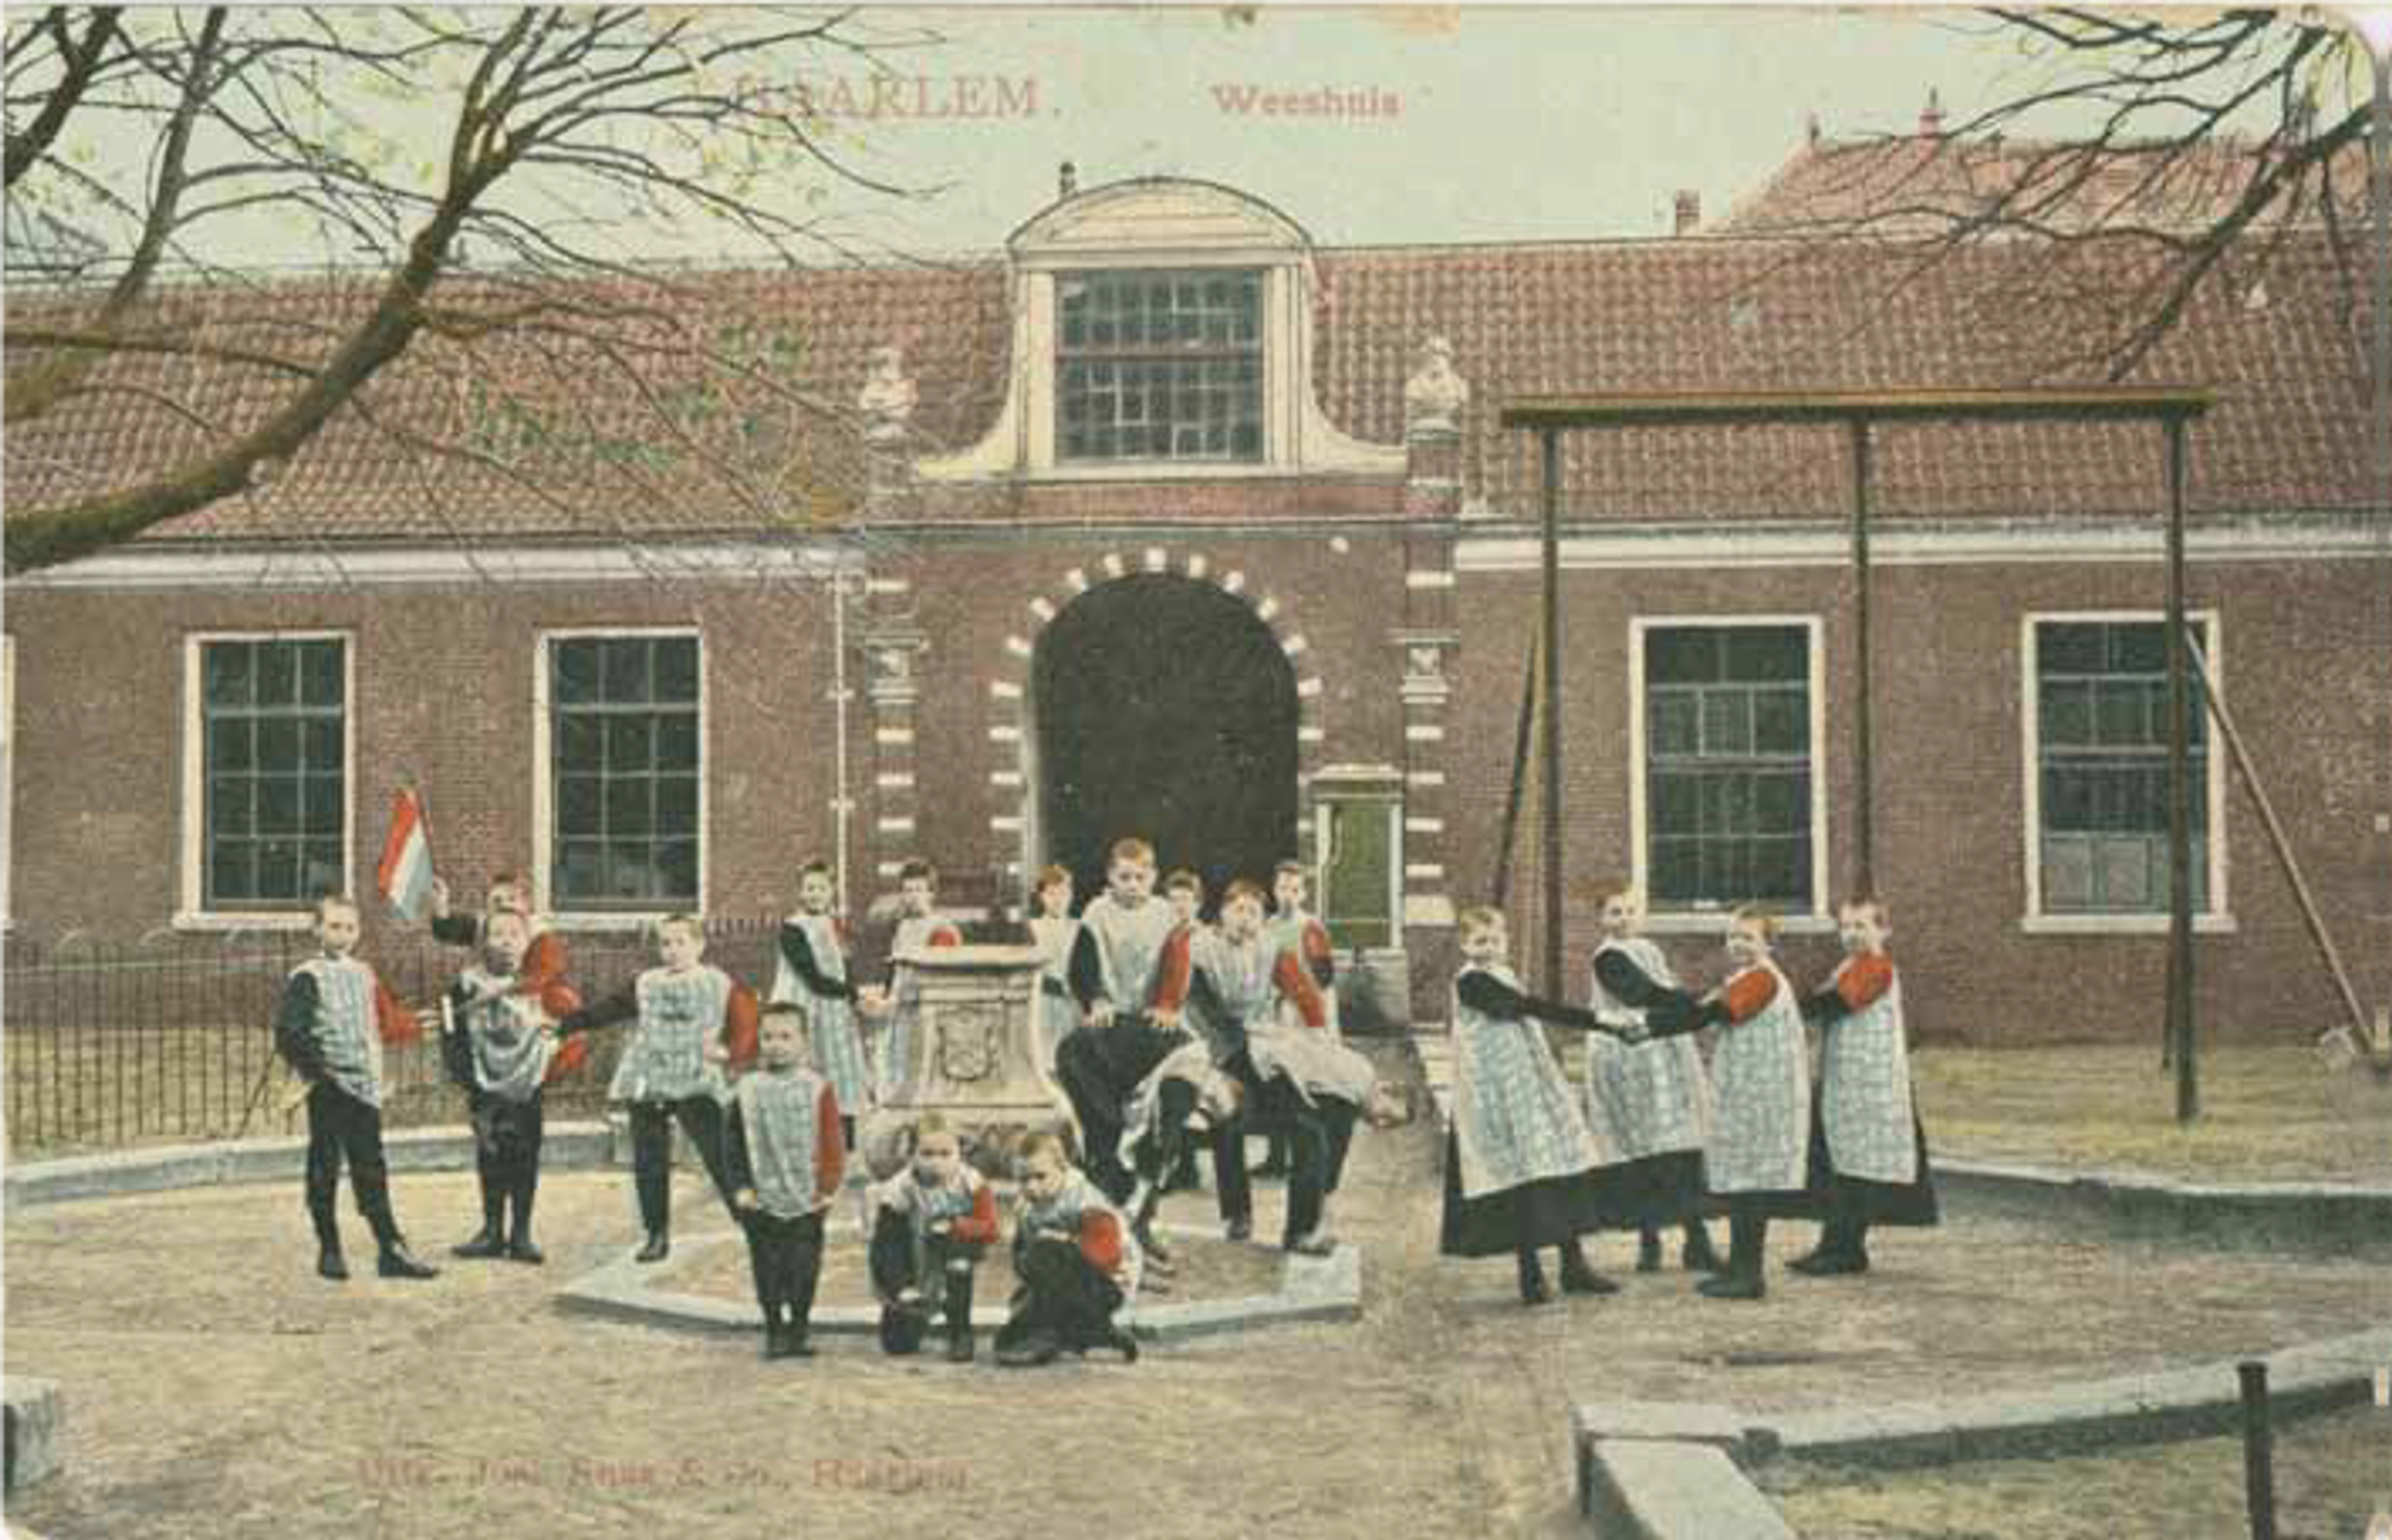 Courtyard at the Frans Hals Museum (Groot Heiligland) in the 20th century, photograph from the Noord-Hollands Archief (North Holland Archive) 